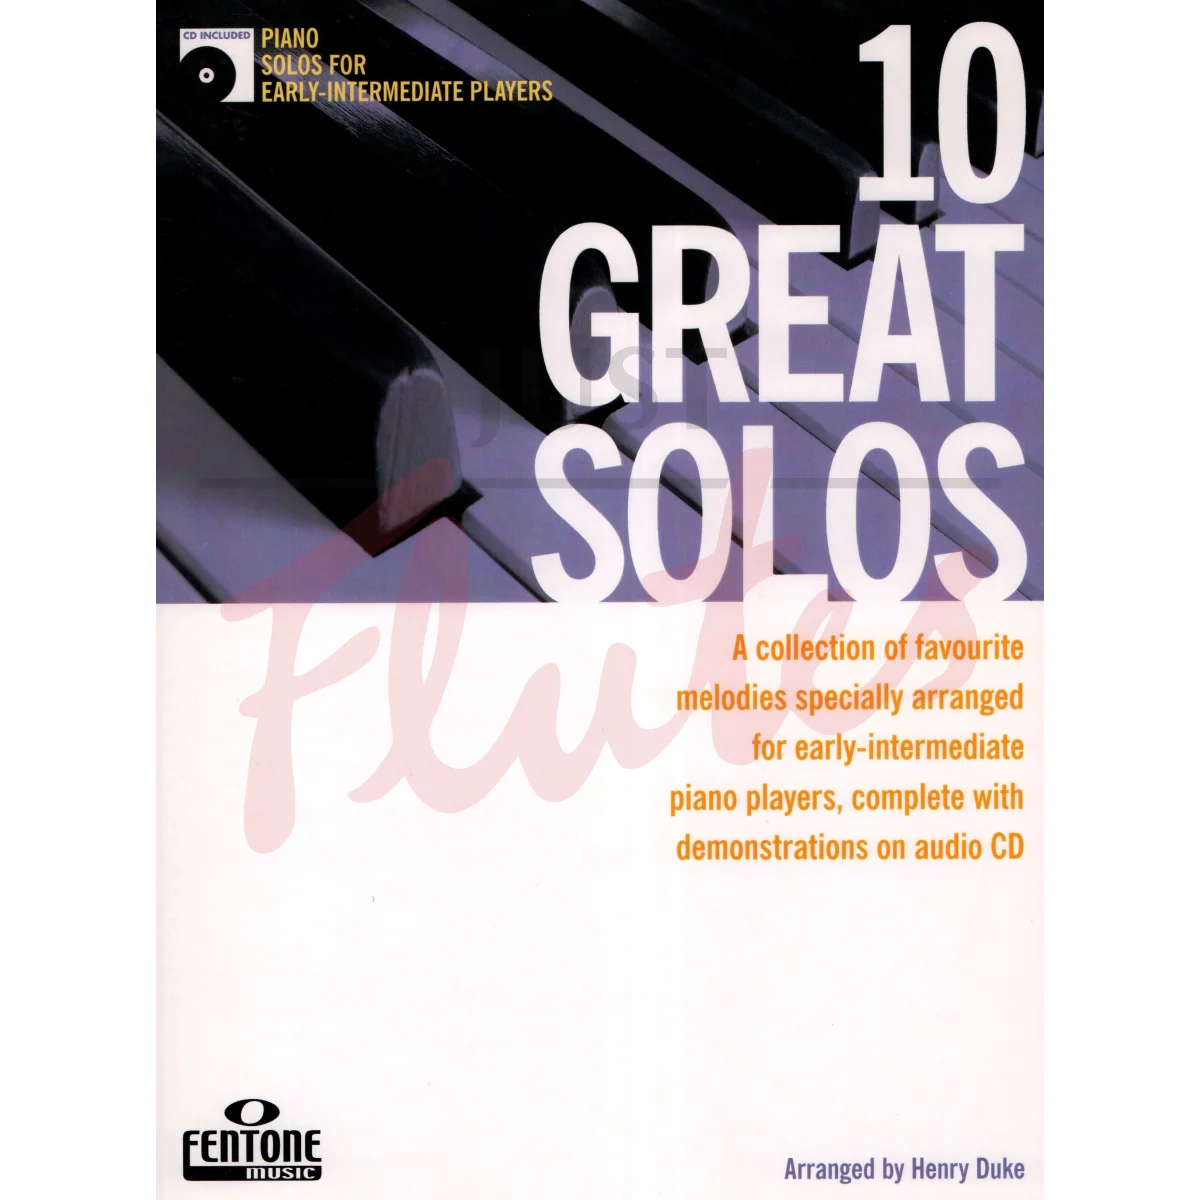 10 Great Solos for Piano